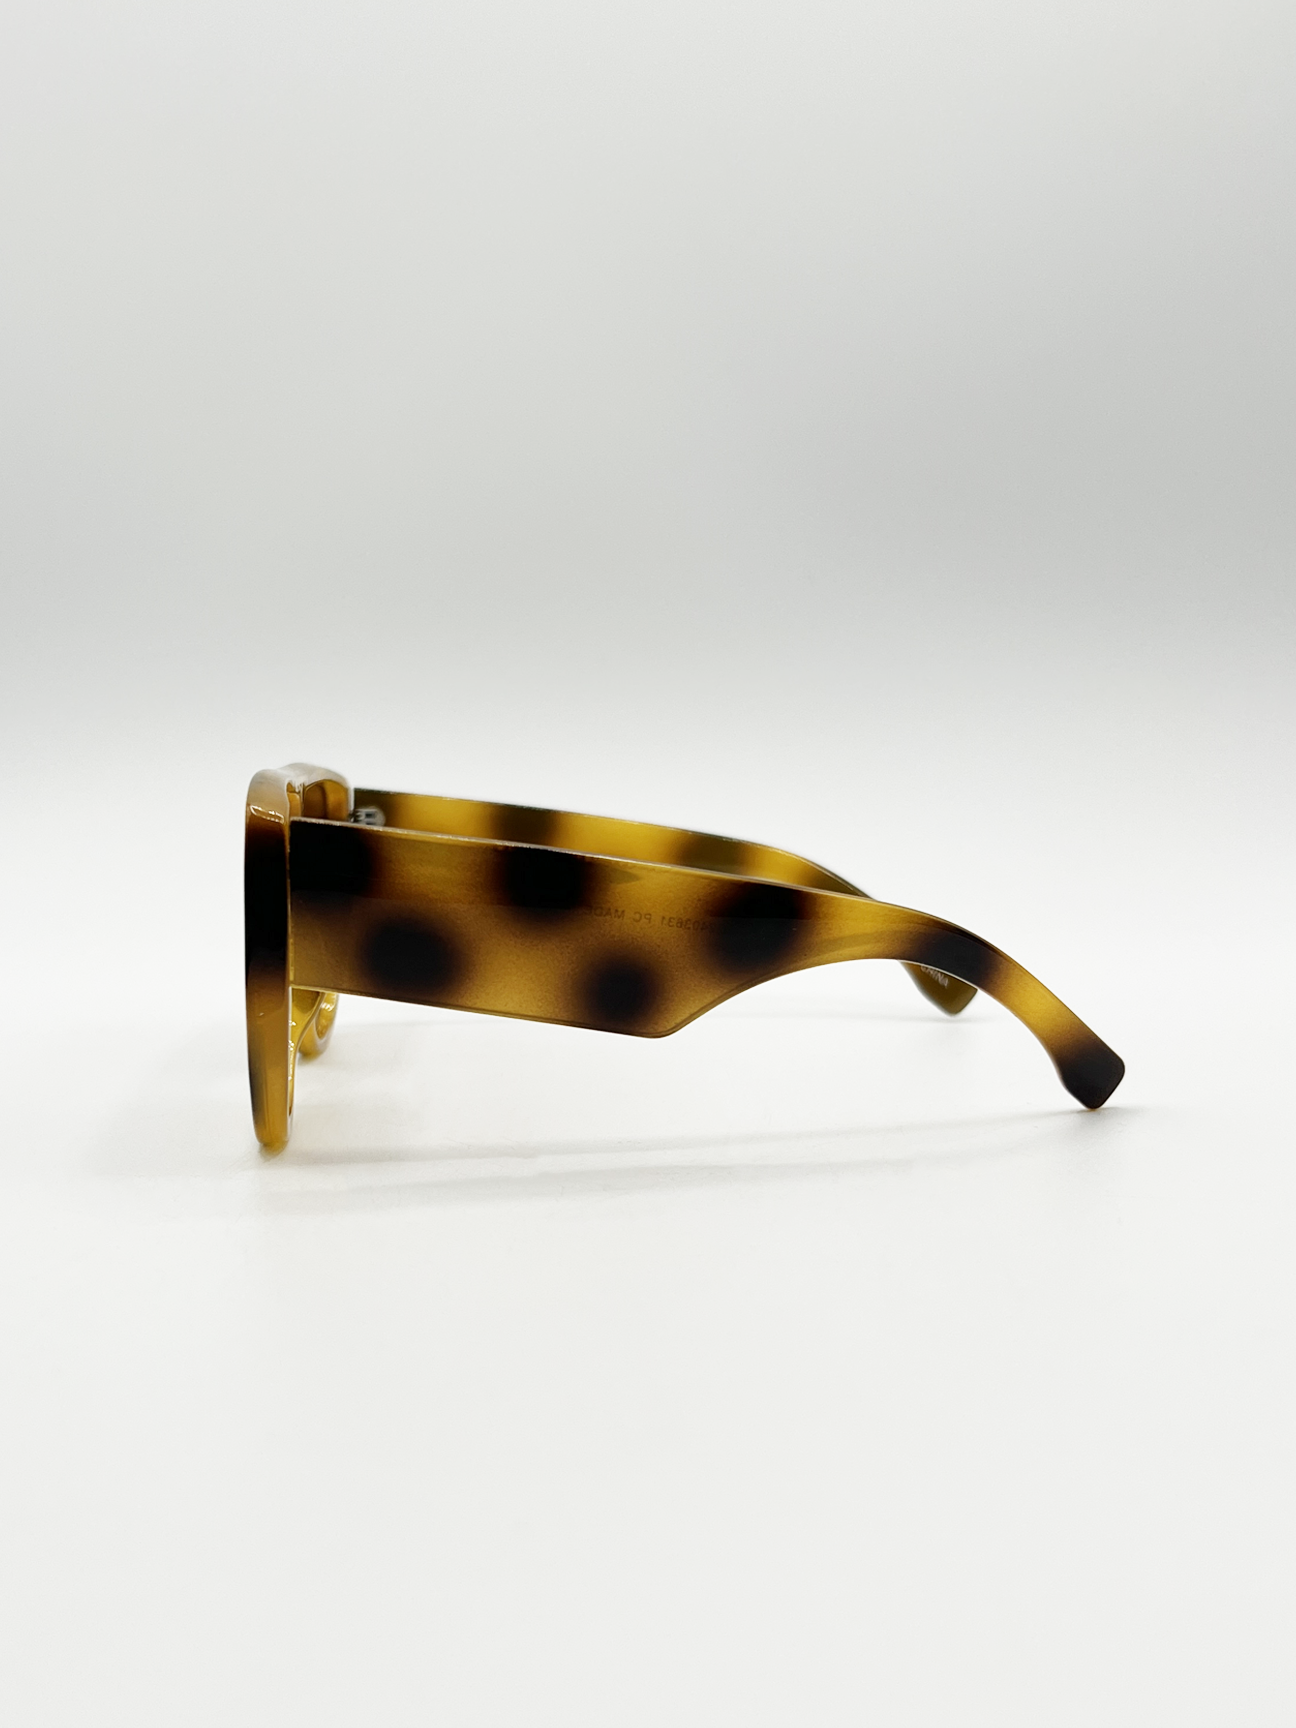 Oversized Flat Top Spotty sunglasses in Brown